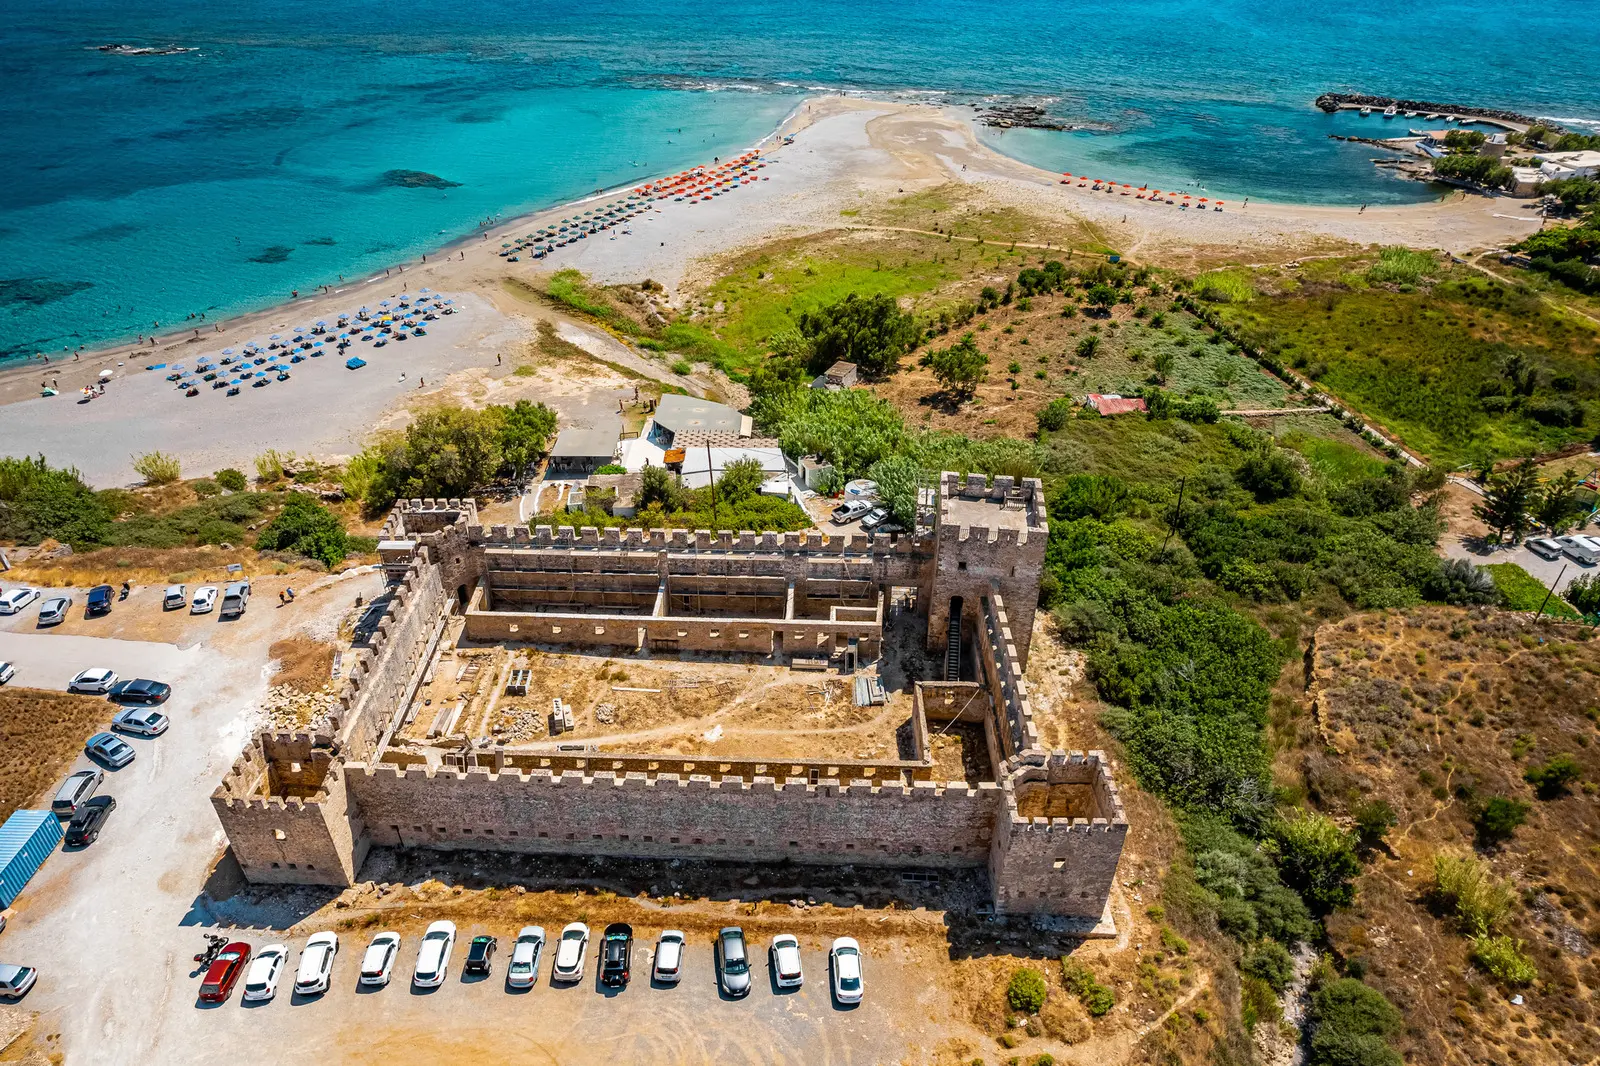 Aerial view of cars parked  around an old stone fortress next to Frangokastello Beach in Chania Crete.